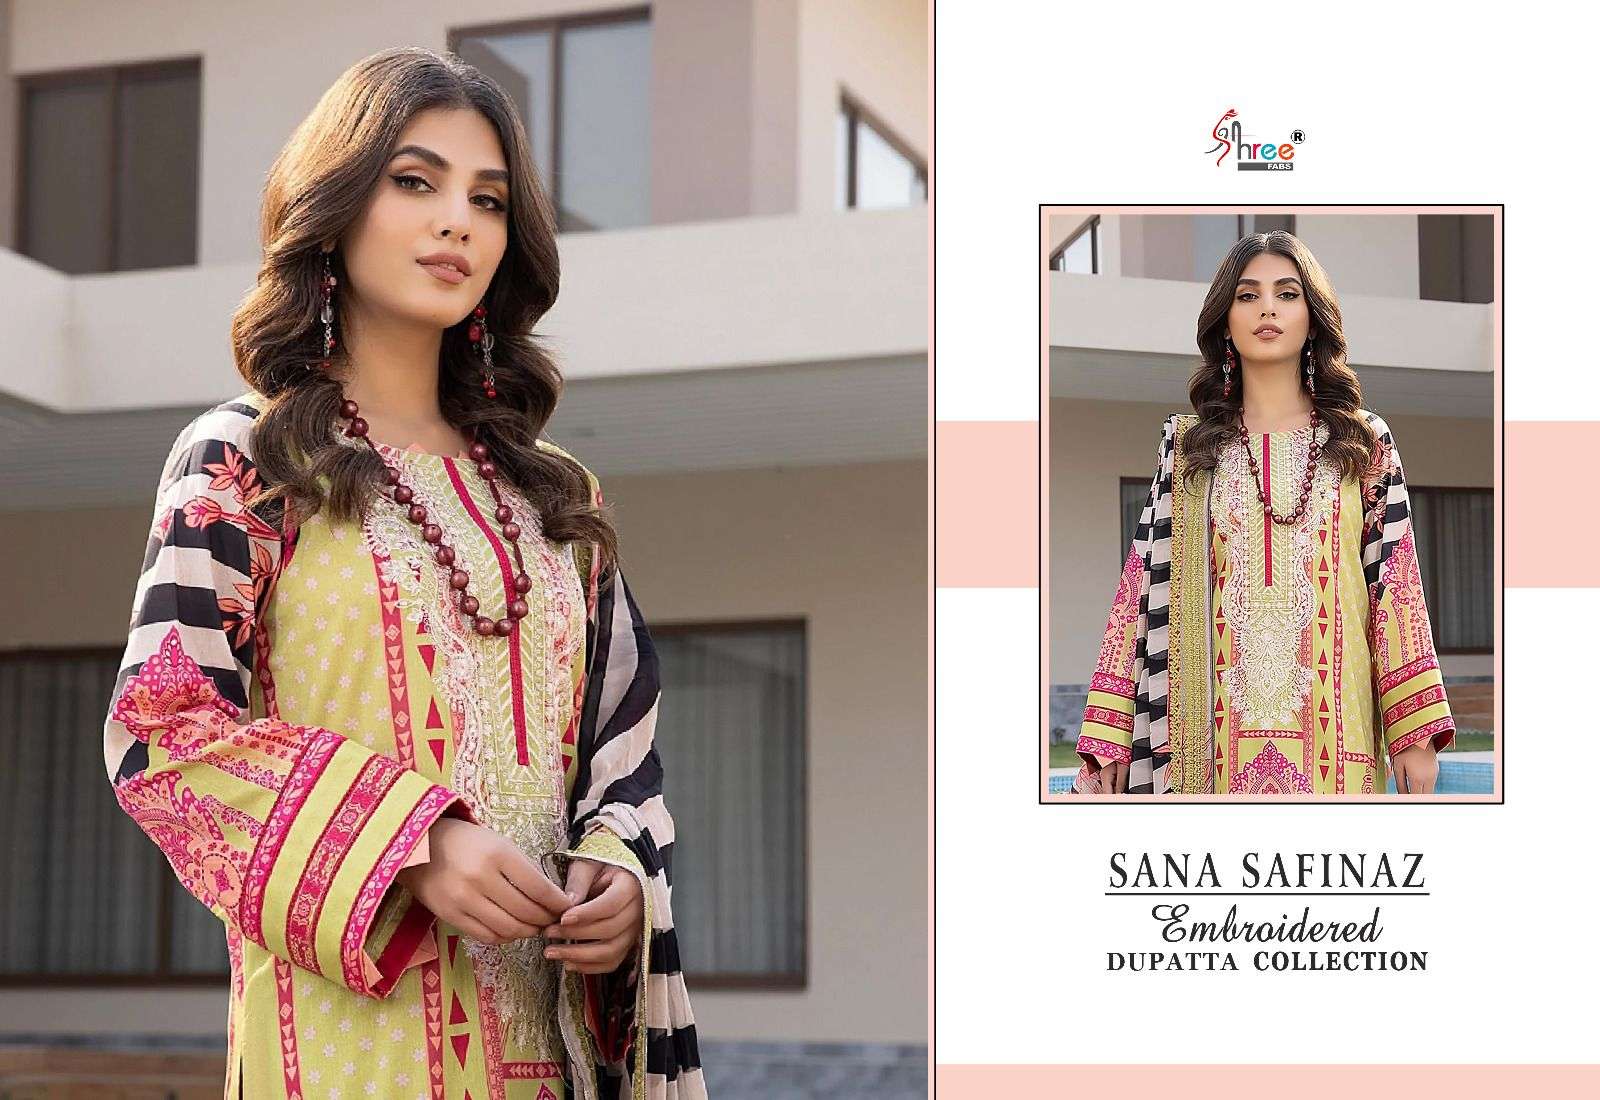 sana safinaz embroidered dupatta collection by shree fabs wholesale catalogue supplier surat